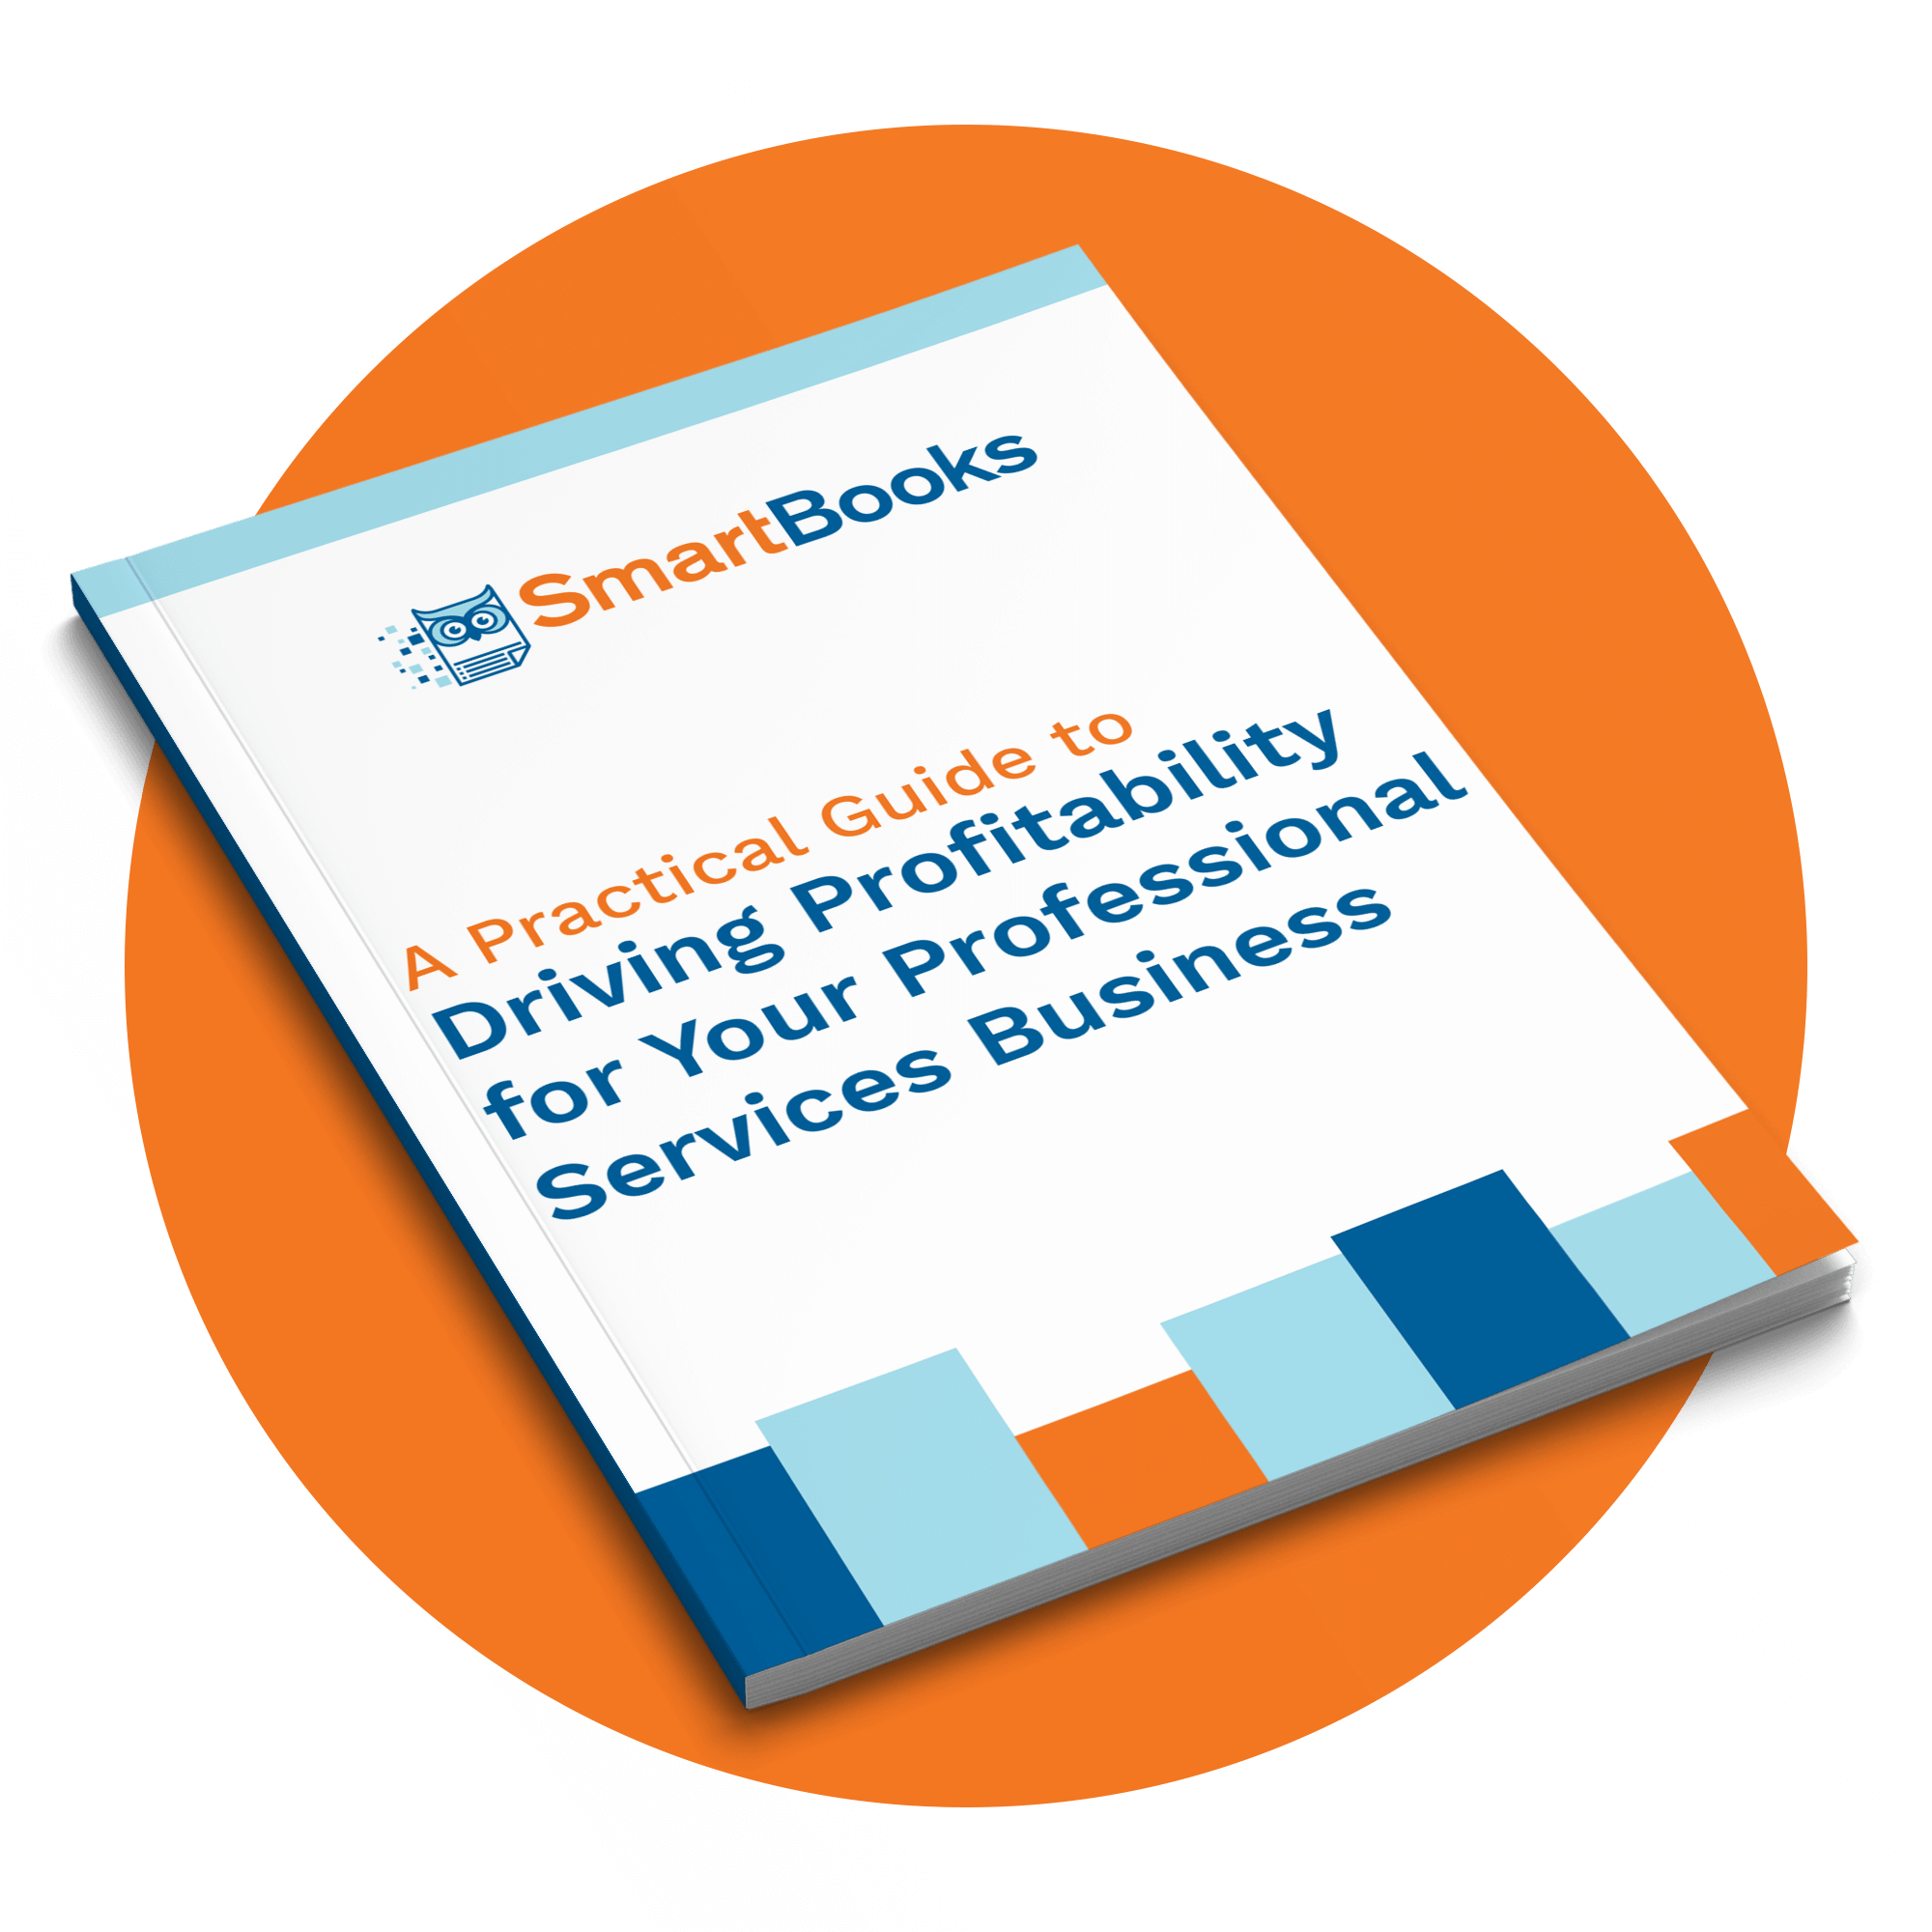 A Practicel Guide to Driving Profitability for Your Service Business